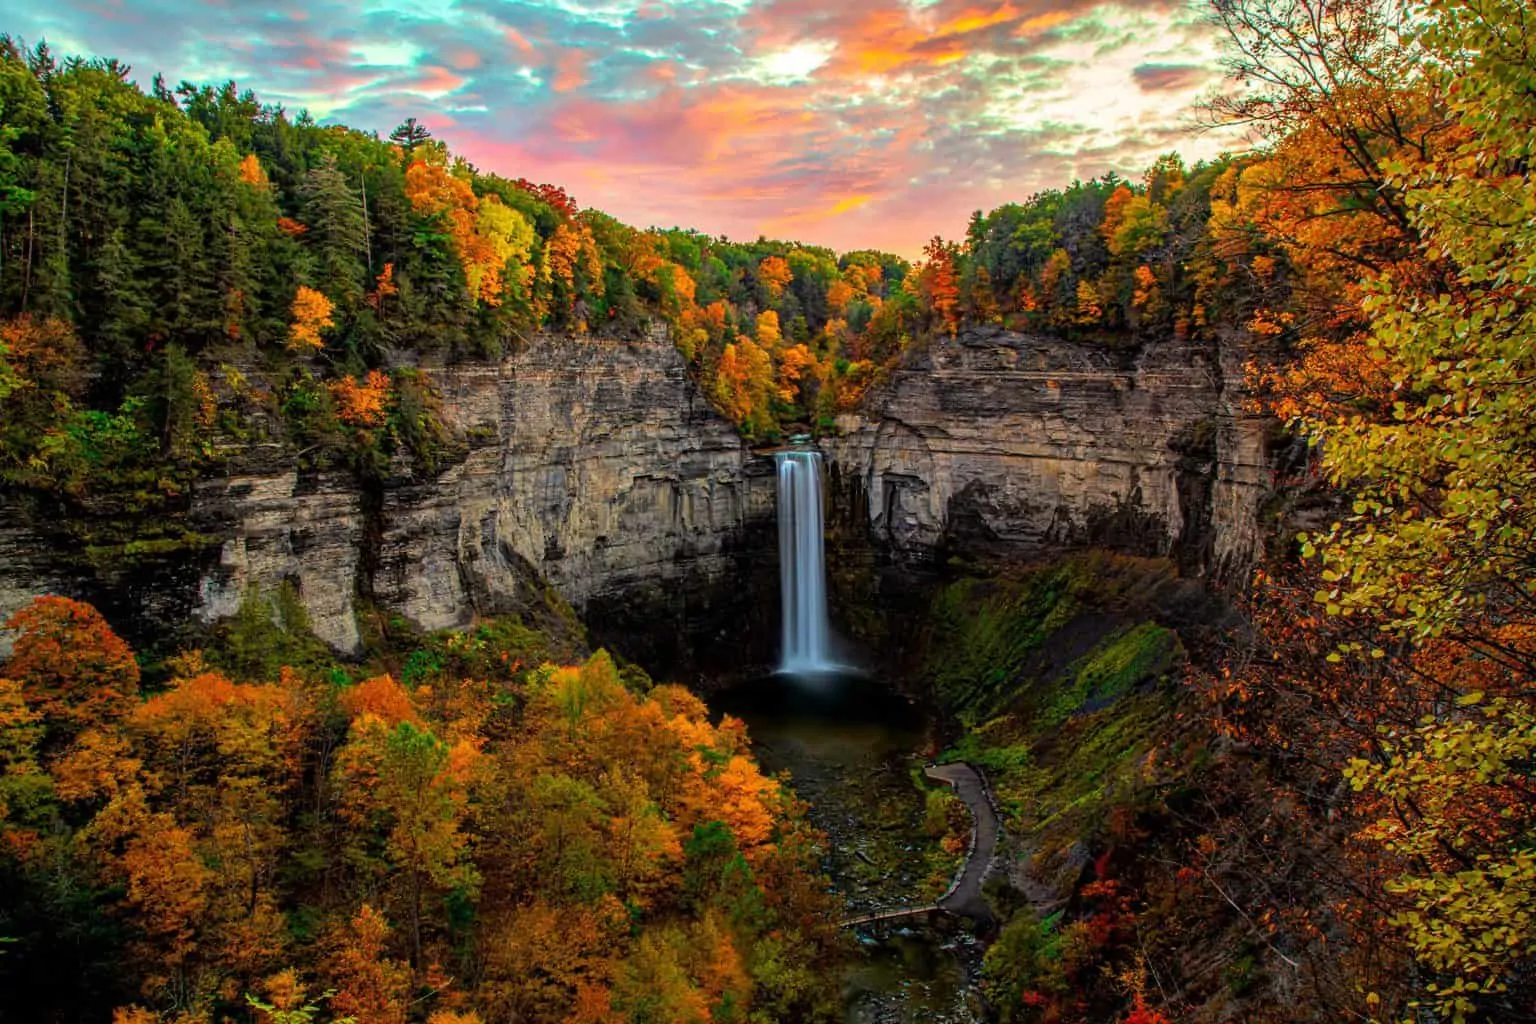  Beautiful Taughannock Falls surrounded by fall foliage near Ithaca, NY, in the Finger Lakes region. 